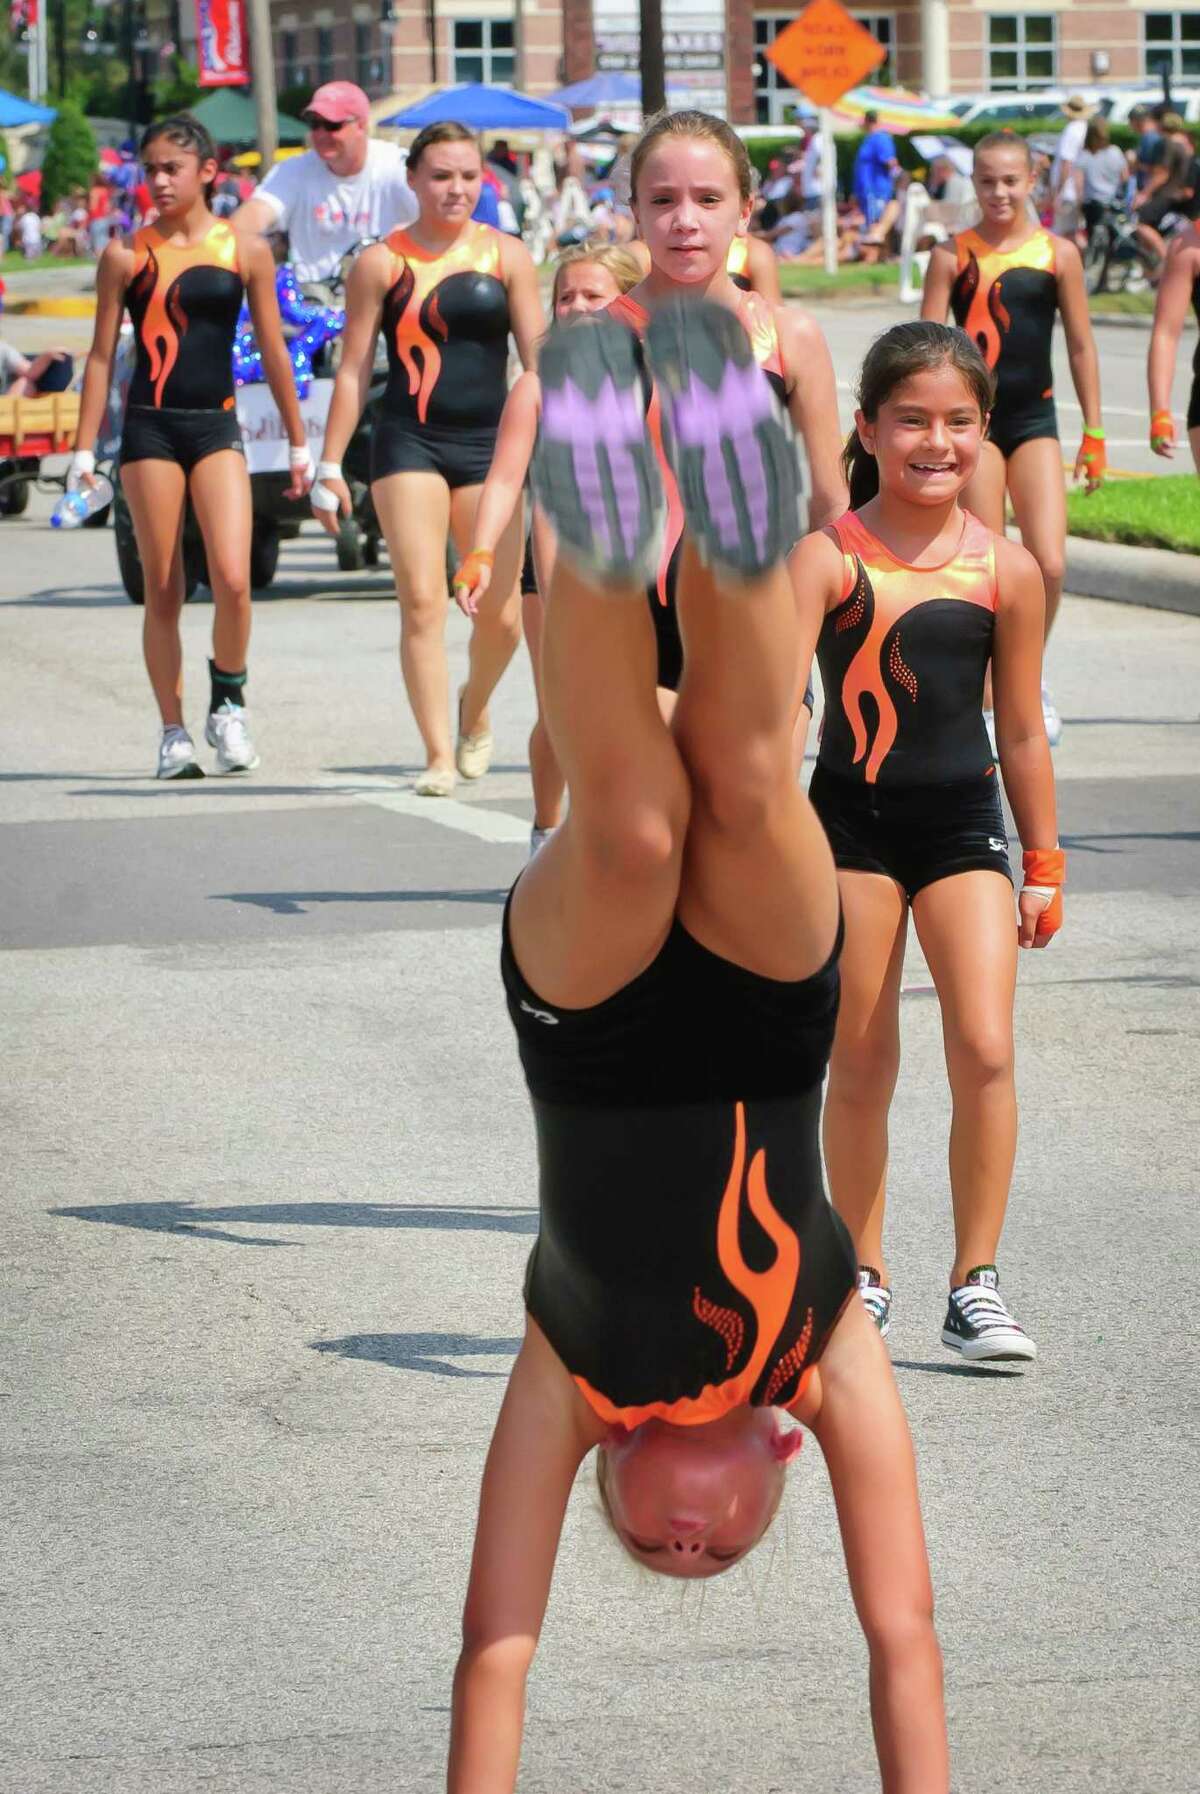 Members of a gymnastic team show their stuff during the 2011 Friendswood Fourth of July parade. The longtime parade will start at 10 a.m. July 4.